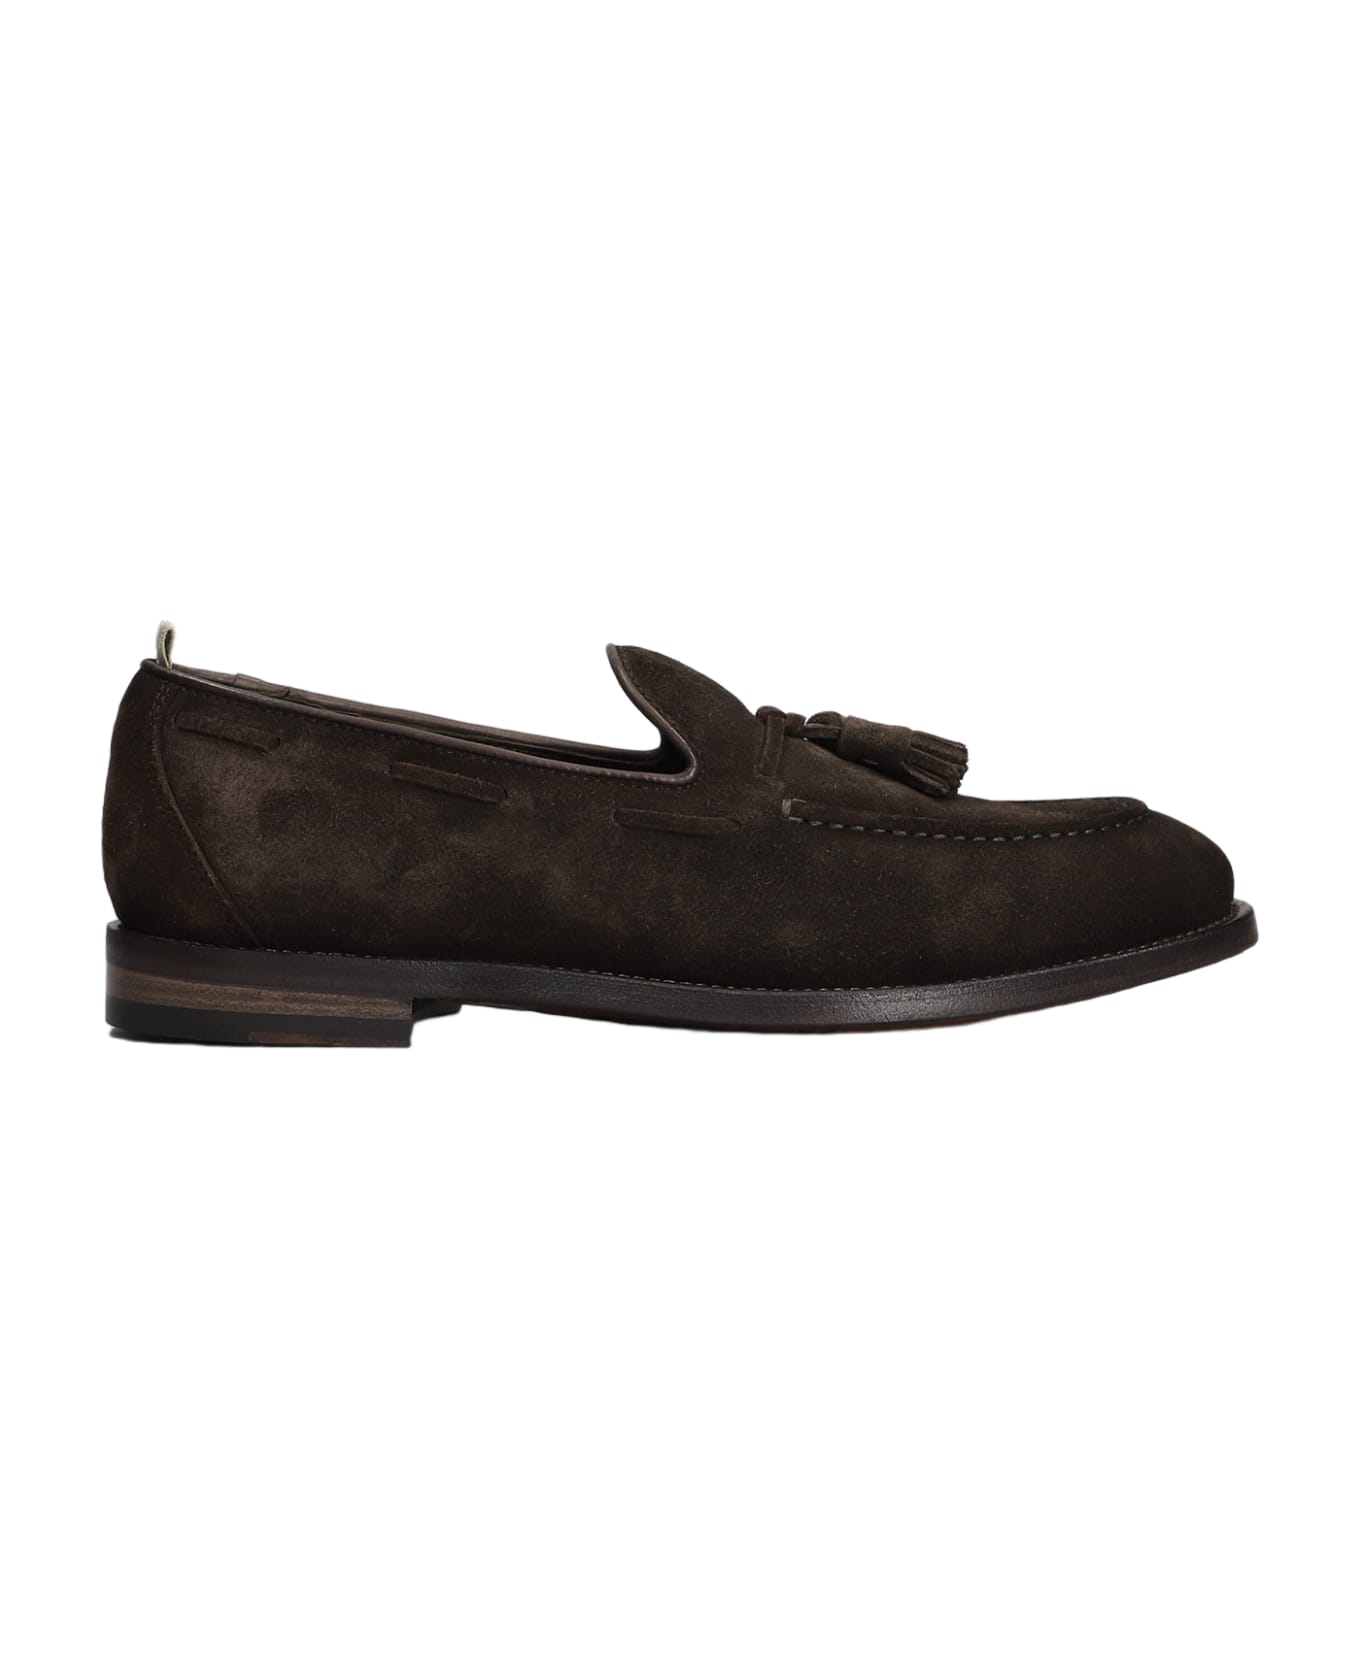 Officine Creative Tulane 004 Loafers In Brown Suede - brown